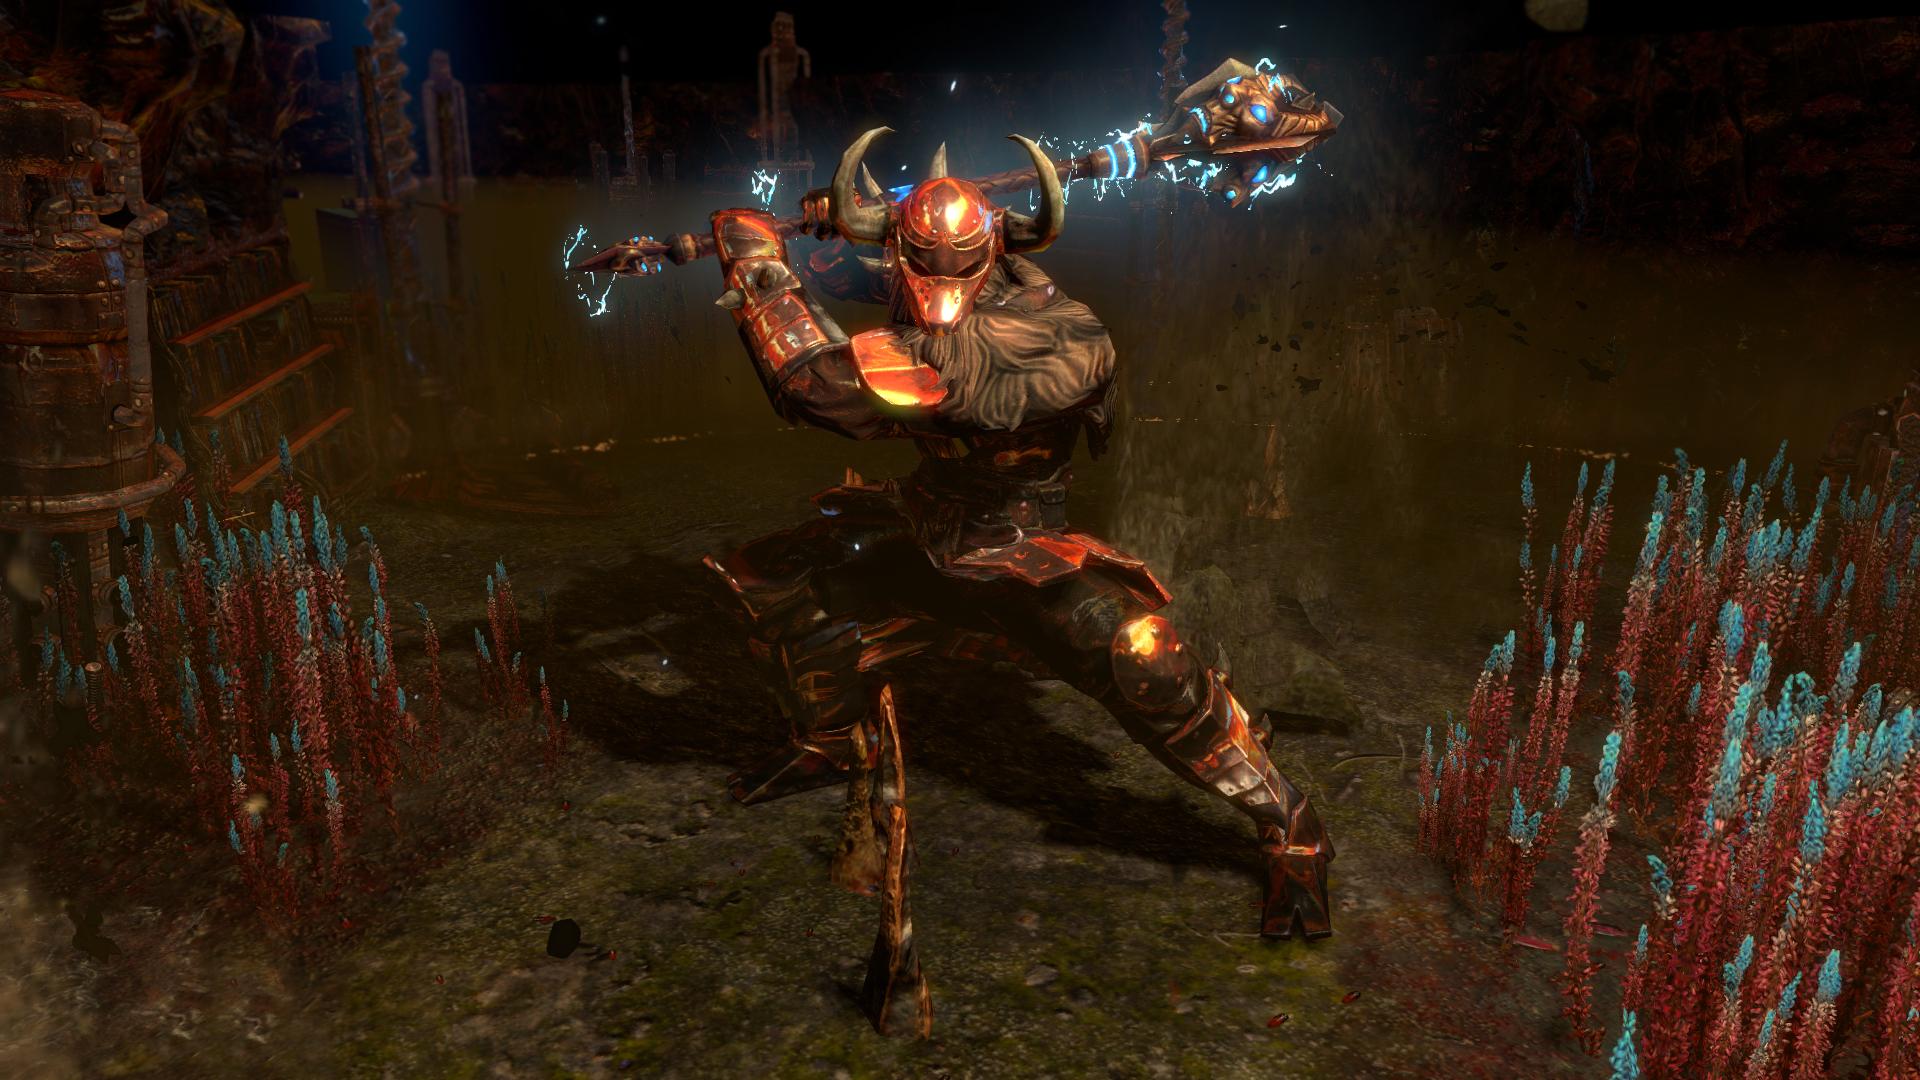 Screenshot №43 from game Path of Exile